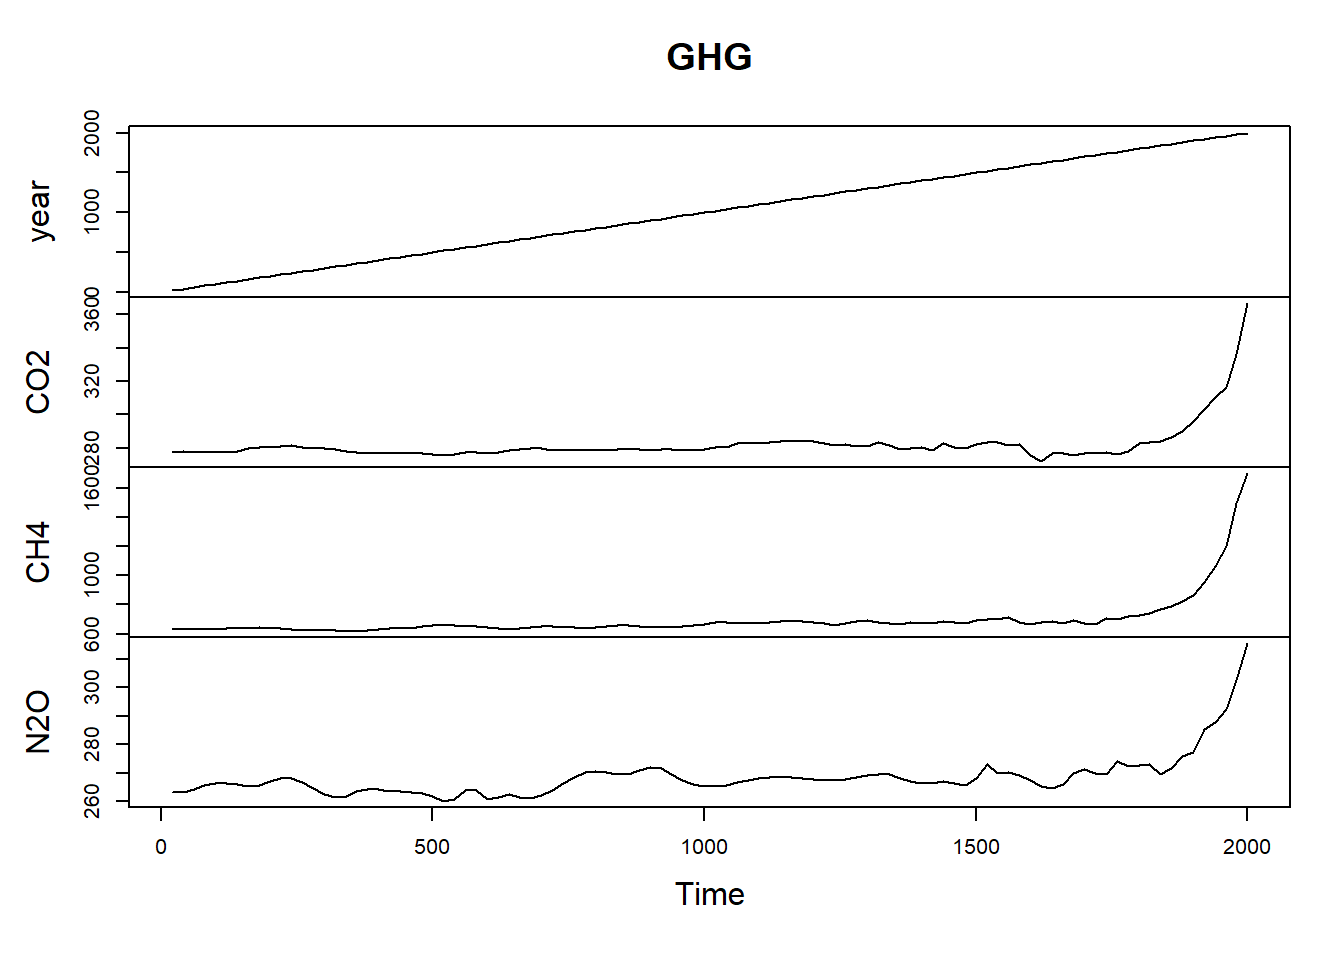 Decomposition of weekly E. coli data, annual period (frequency 52)